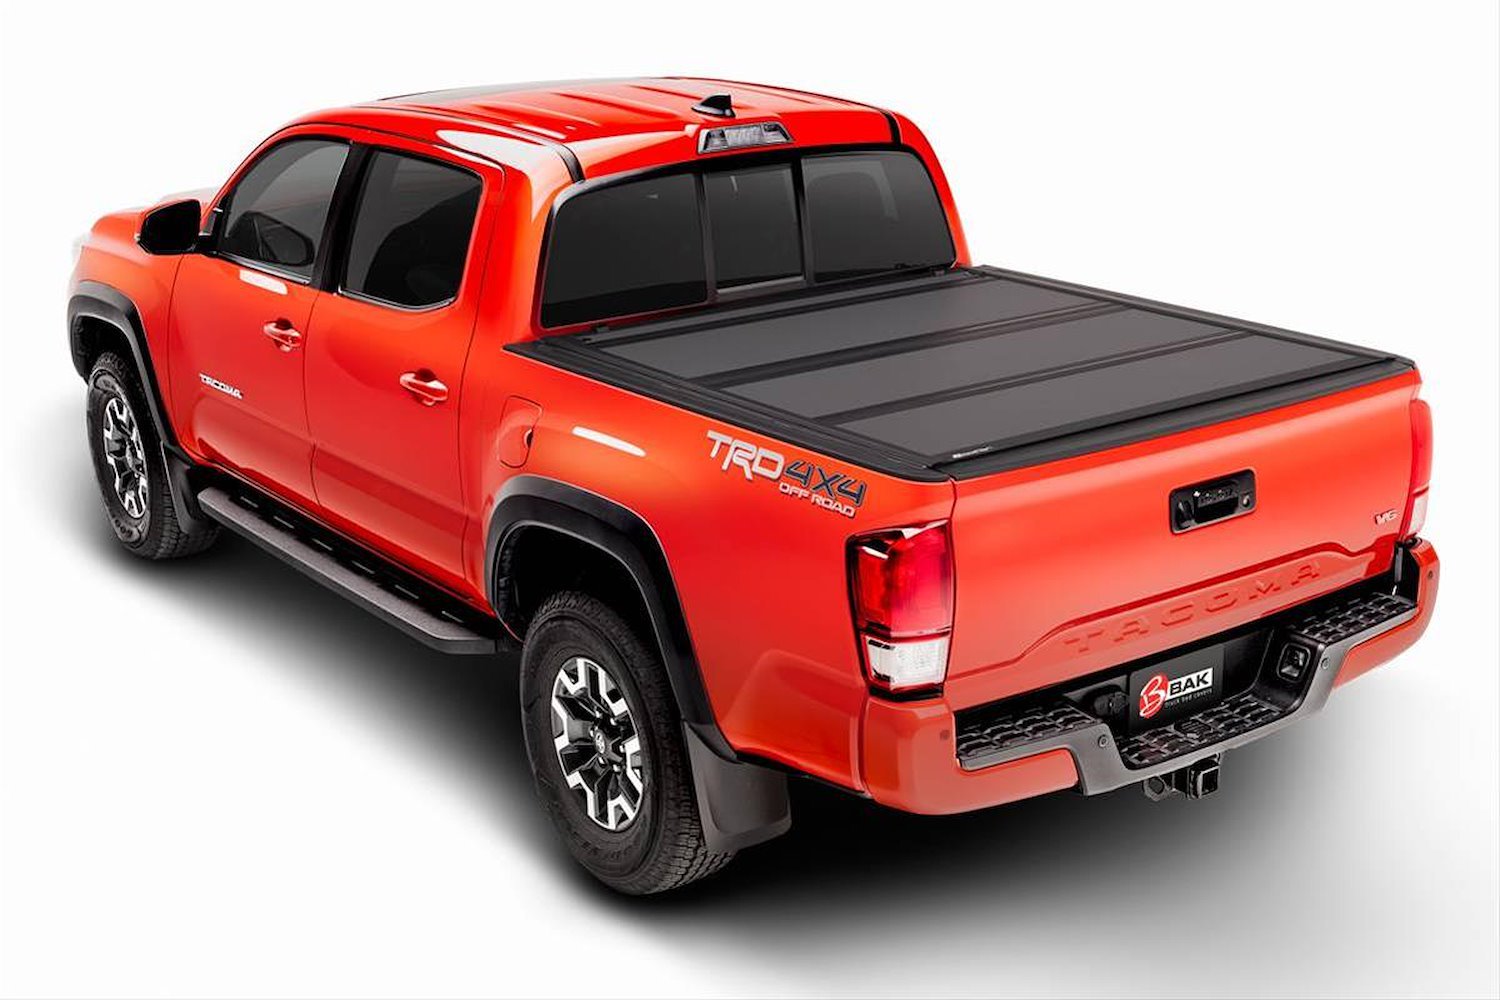 448427 BAKFlip MX4 for Fits Select Toyota Tacoma 6.2 ft. Bed, Hard Folding Cover Style [Black Finish]